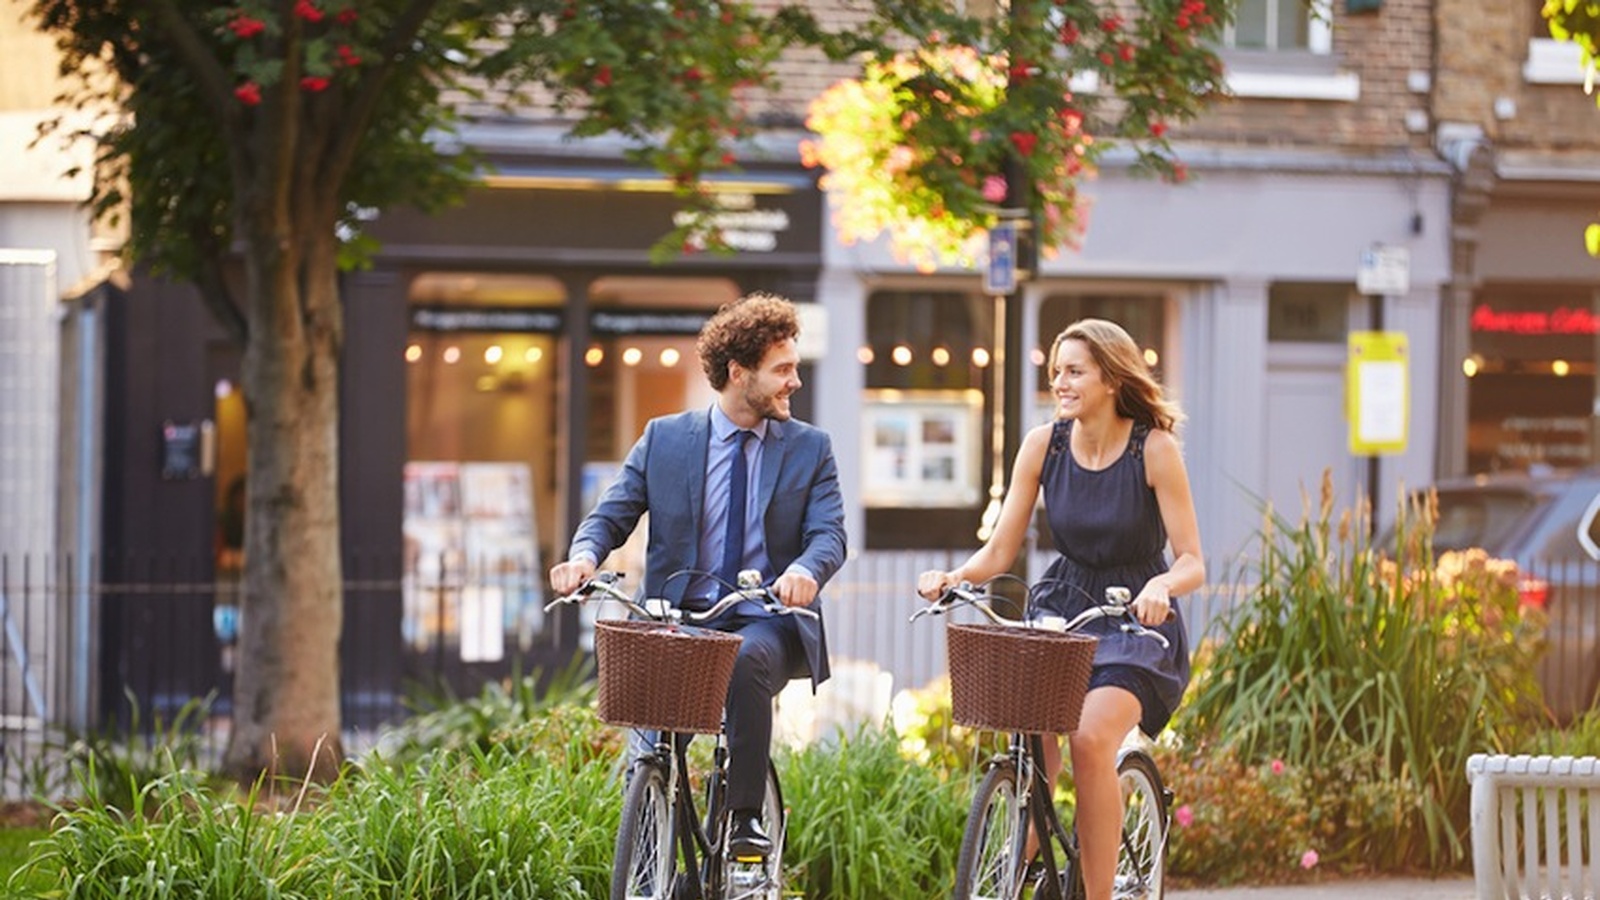 5 Ways To Get Healthy On Your Way To Work!